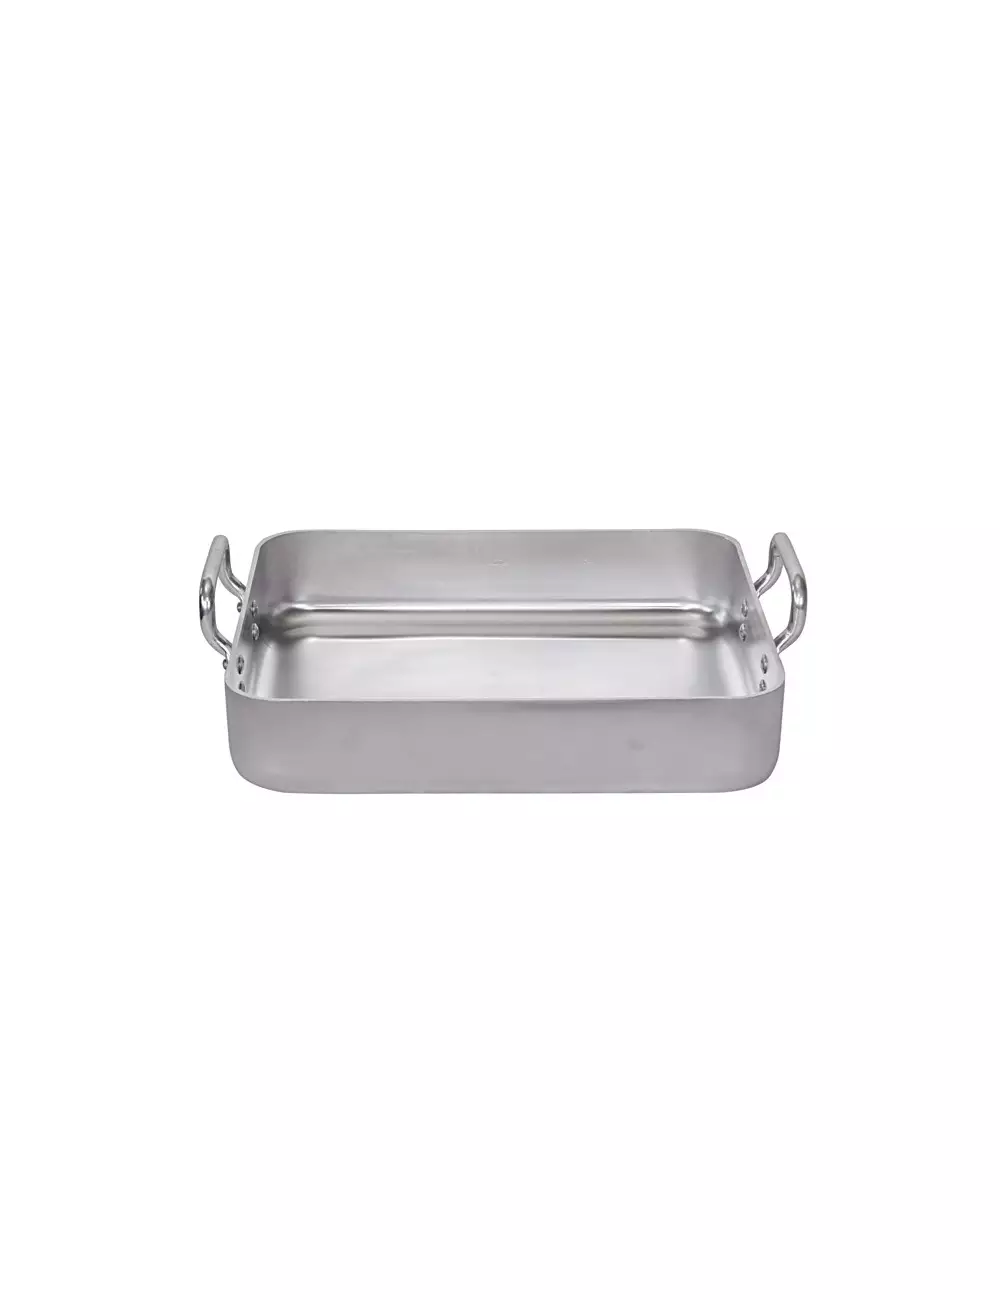  NYHI Silver Aluminum Rectangular Baking Pan, Set of 4, Even  Heat Distribution, Ideal for Table Chafing, Baking, Roasting, Broiling,  Picnics, Tailgates, Catering and Commercial Use: Home & Kitchen